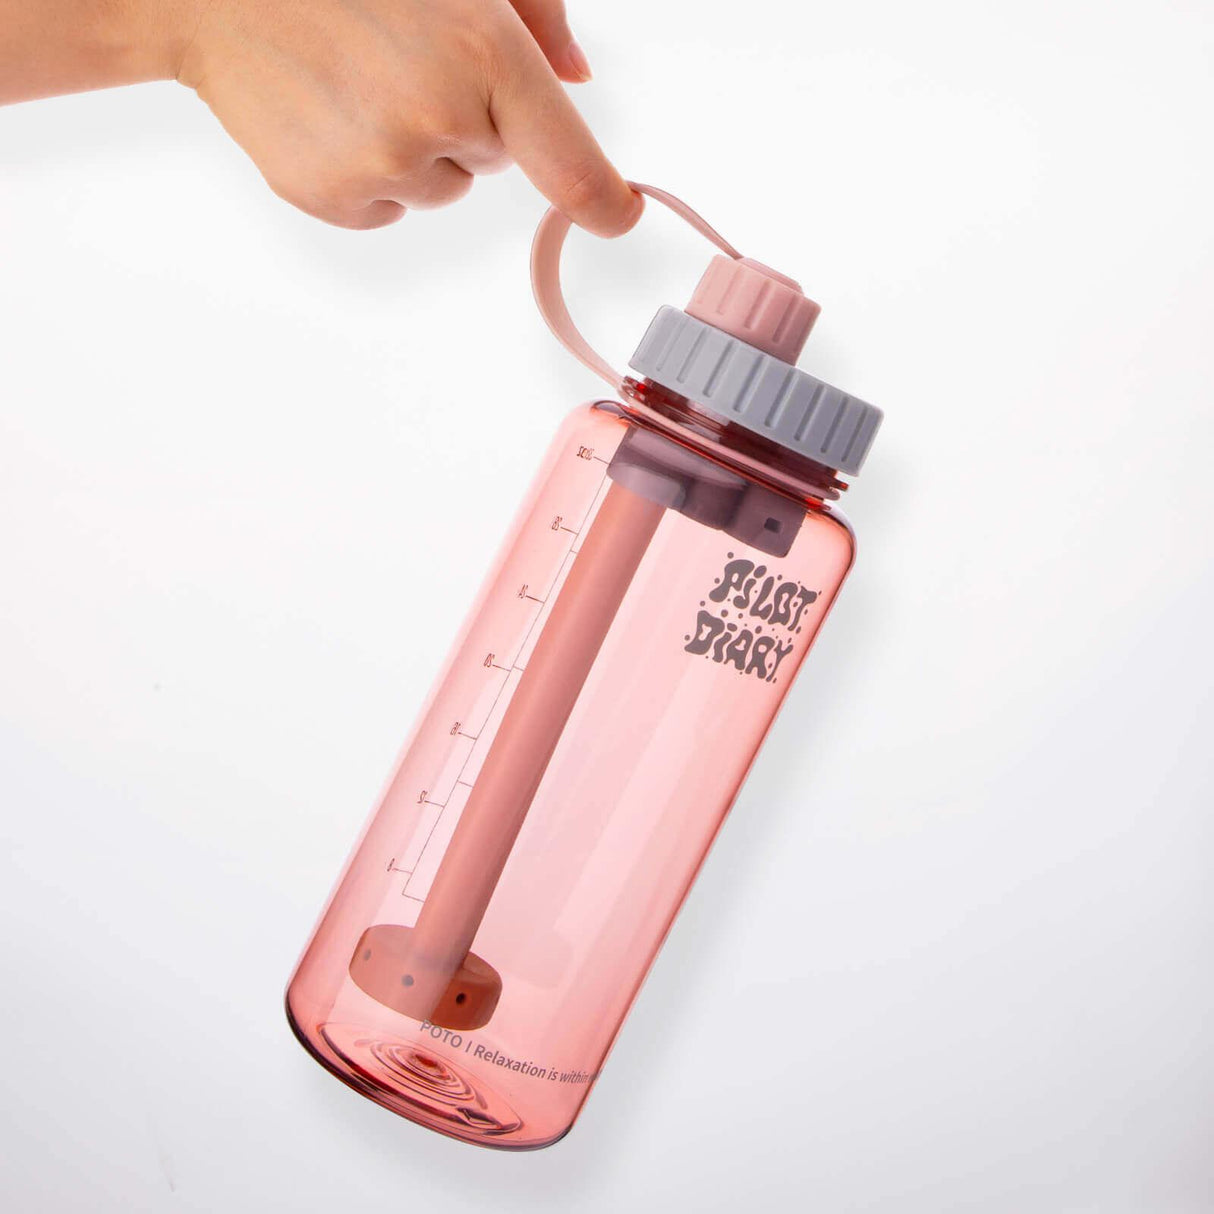 Pilot Diary POTO Water Bottle Bong in Pink, Hand-held Side View, Portable and Discreet